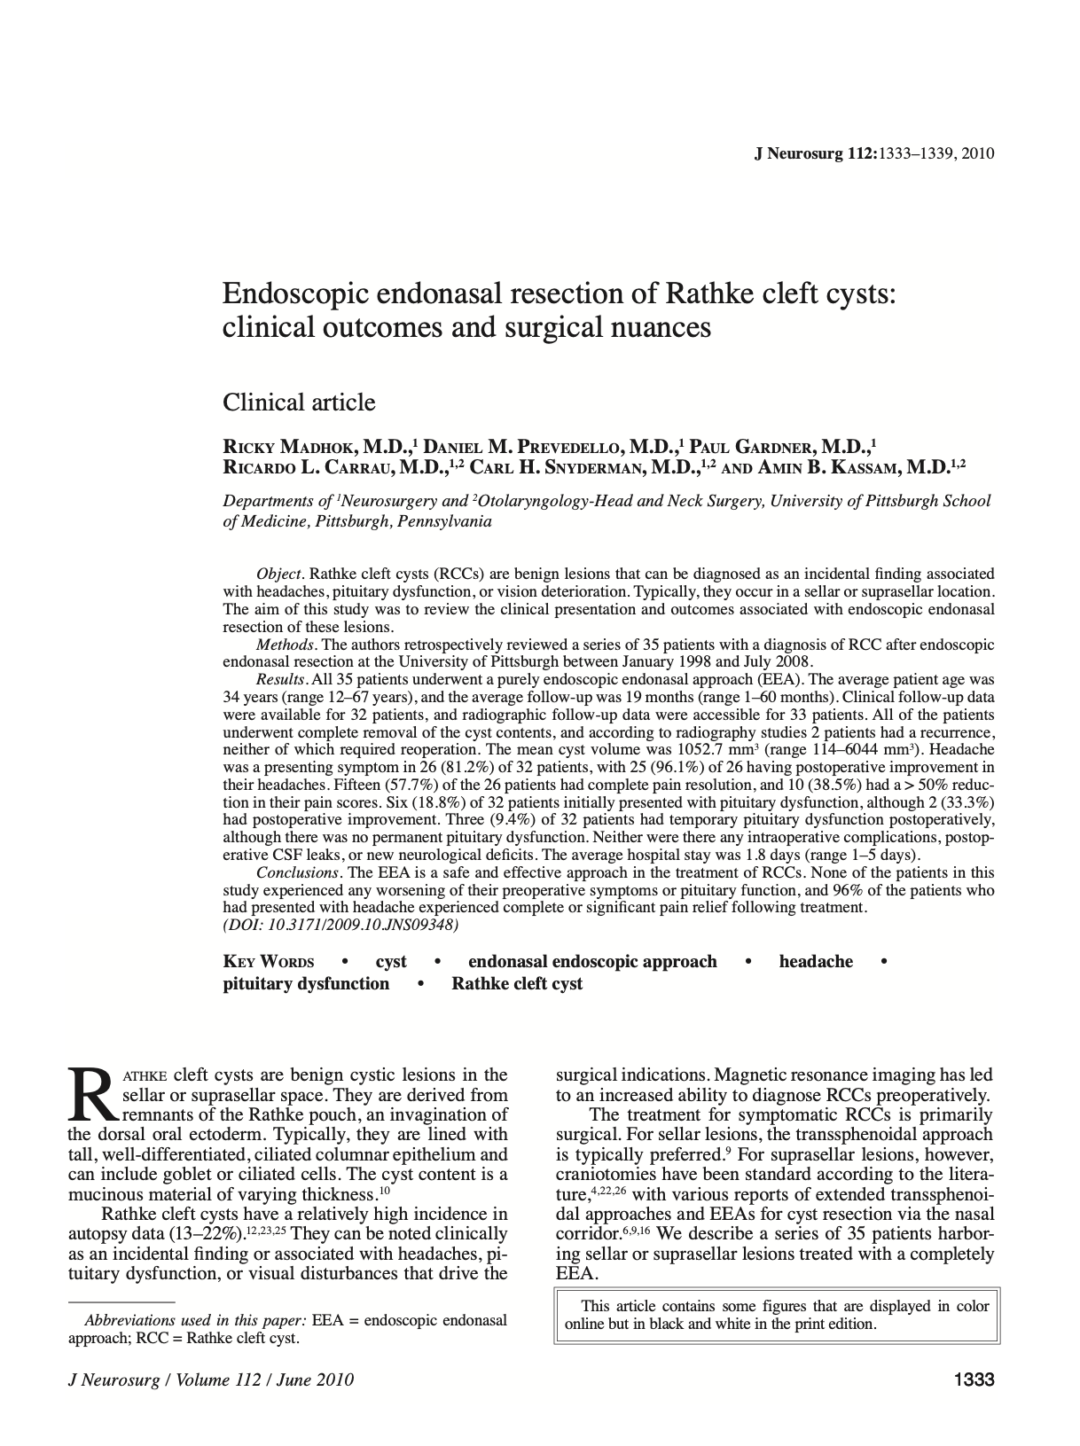 Endoscopic endonasal resection of Rathke cleft cysts: clinical outcomes and surgical nuances